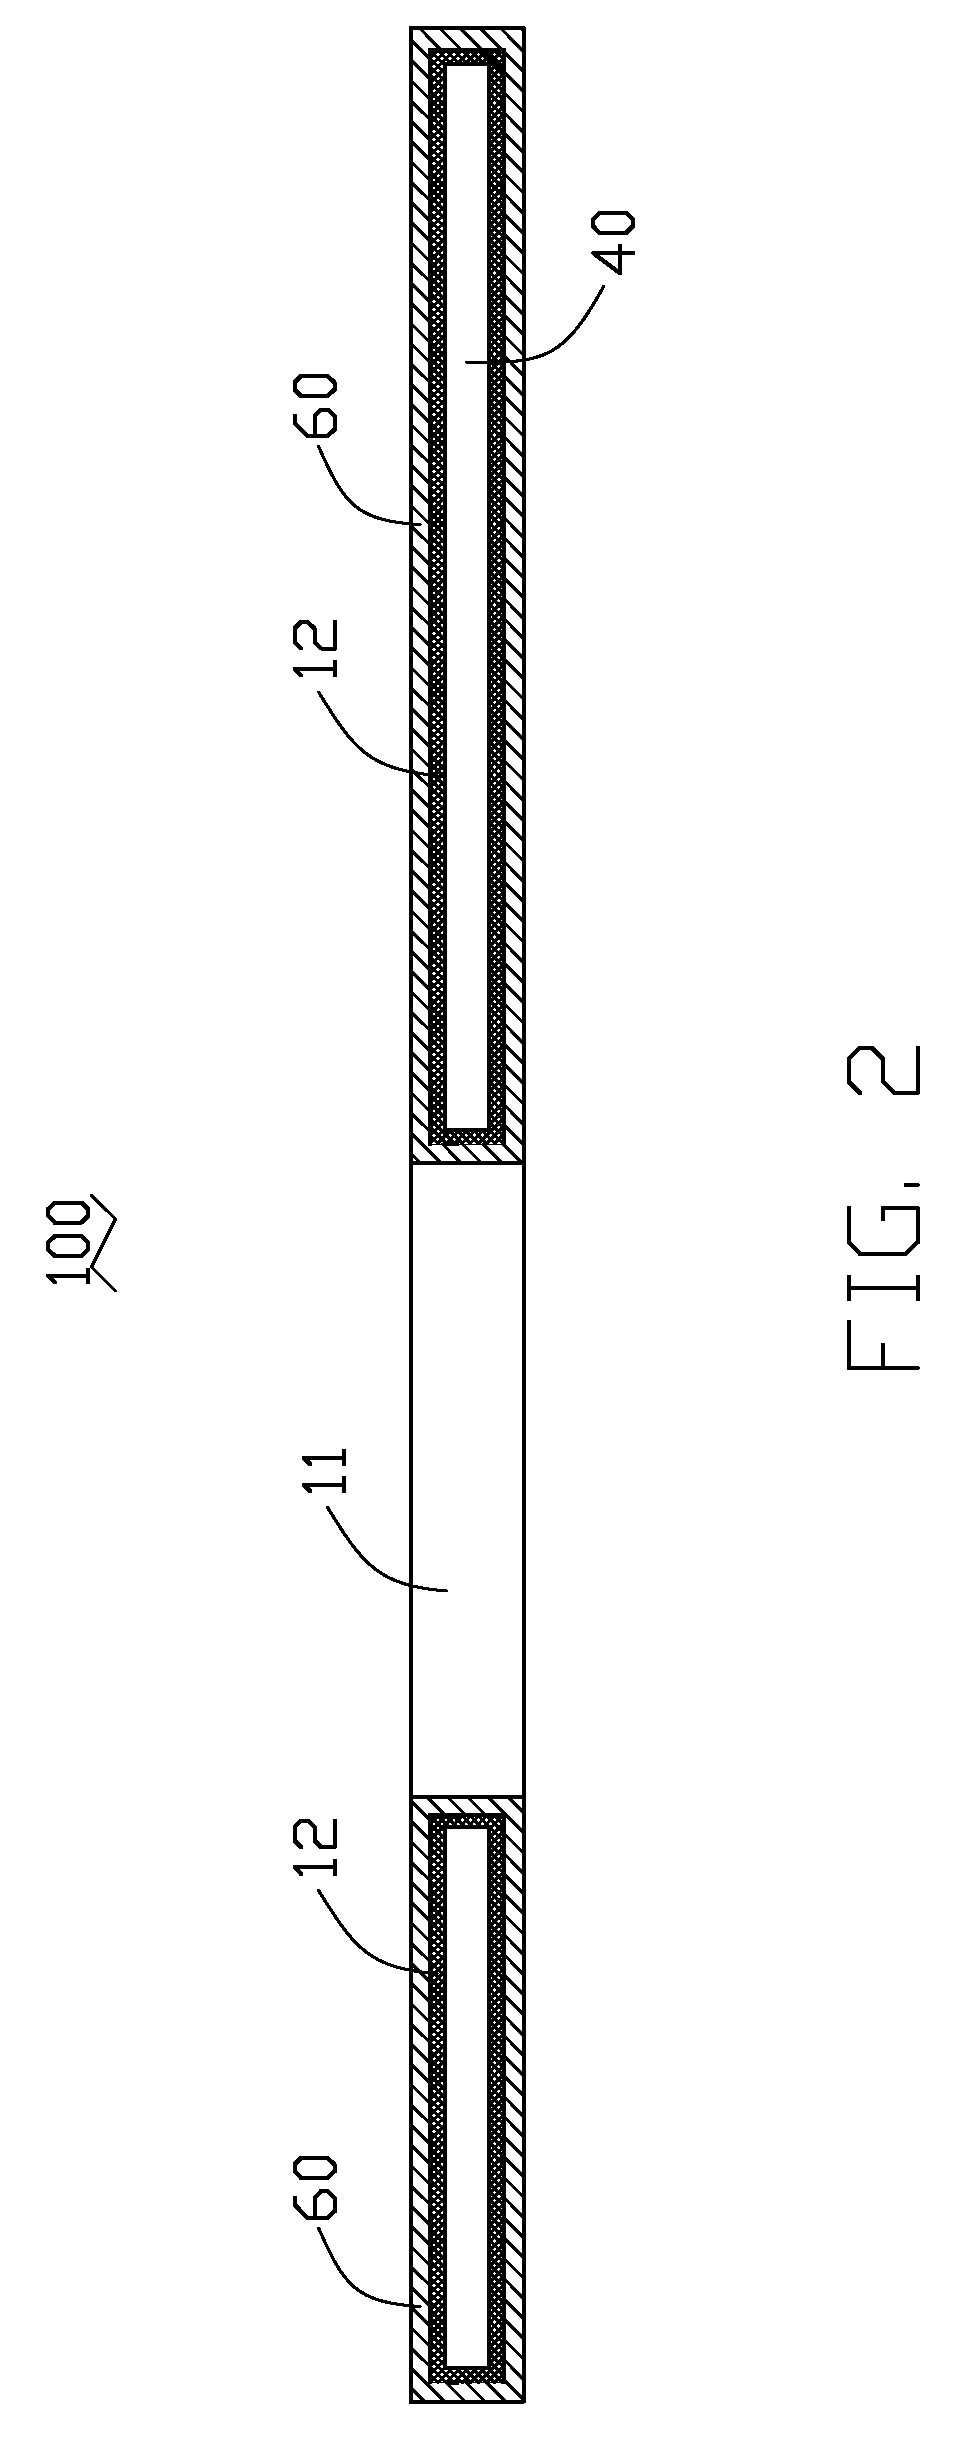 Heat spreader with vapor chamber and method of manufacturing the same